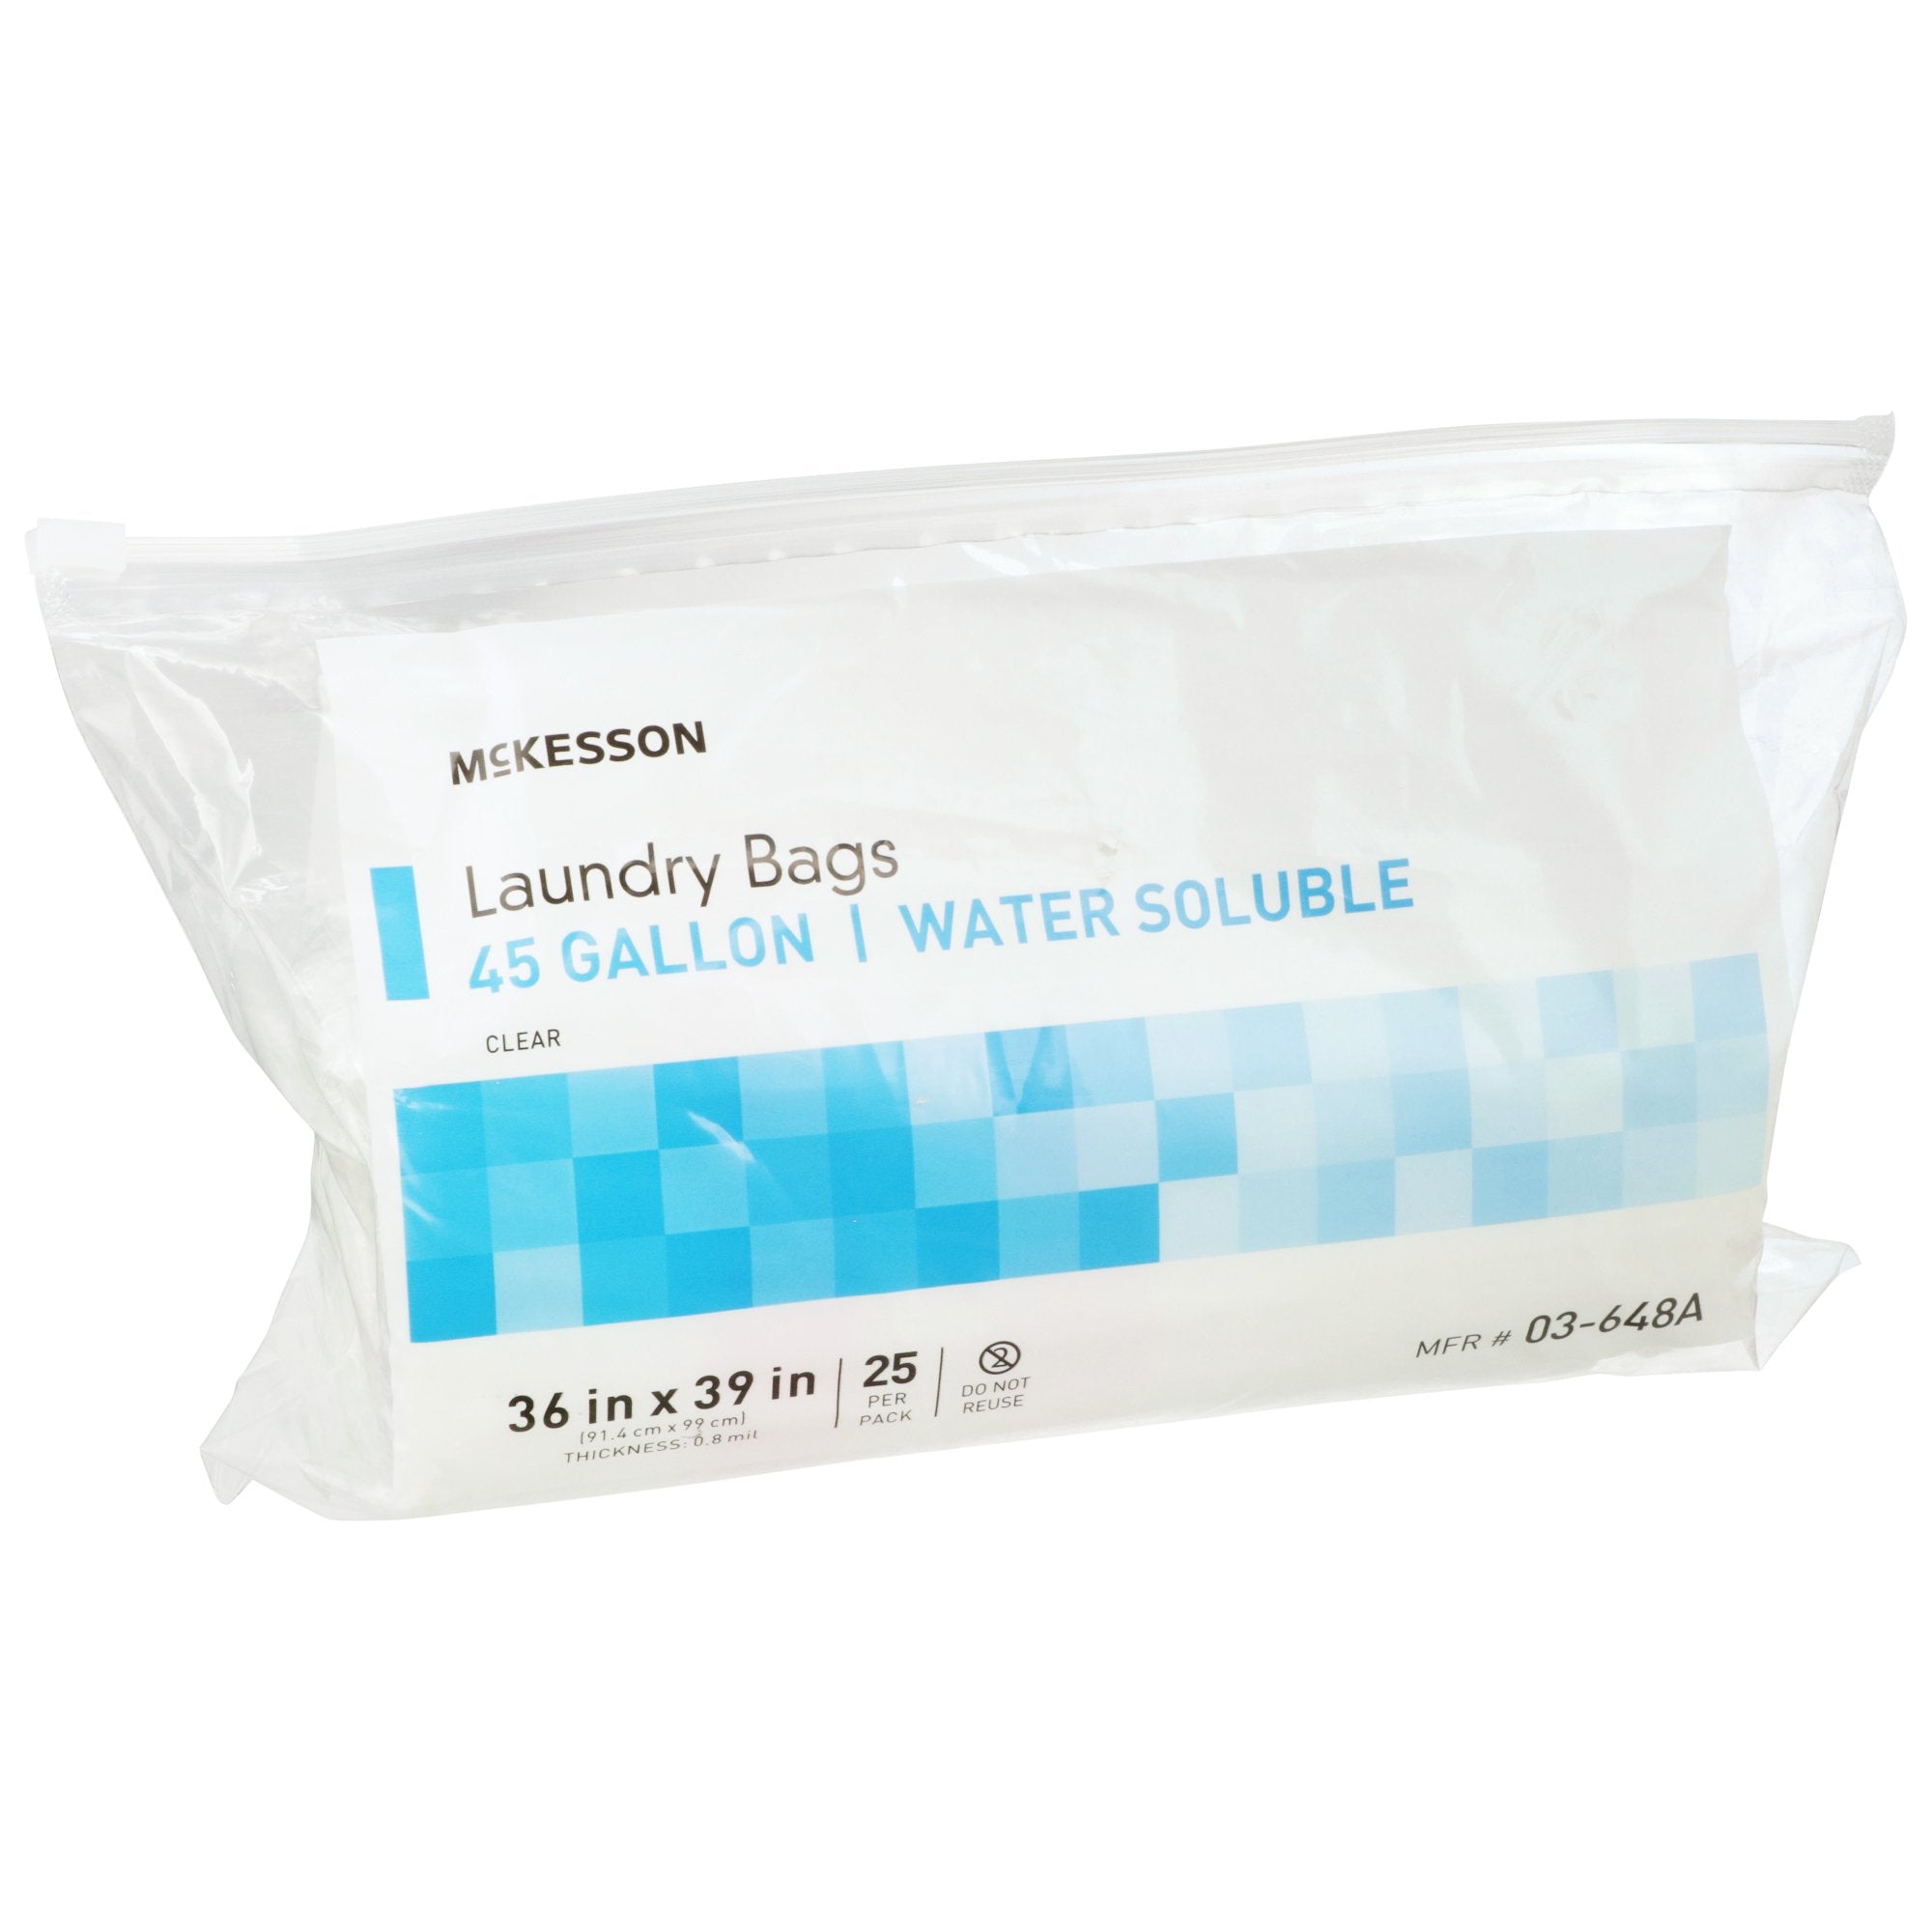 McKesson Water Soluble Laundry Bag, 40-45 gal Capacity (25 Units)